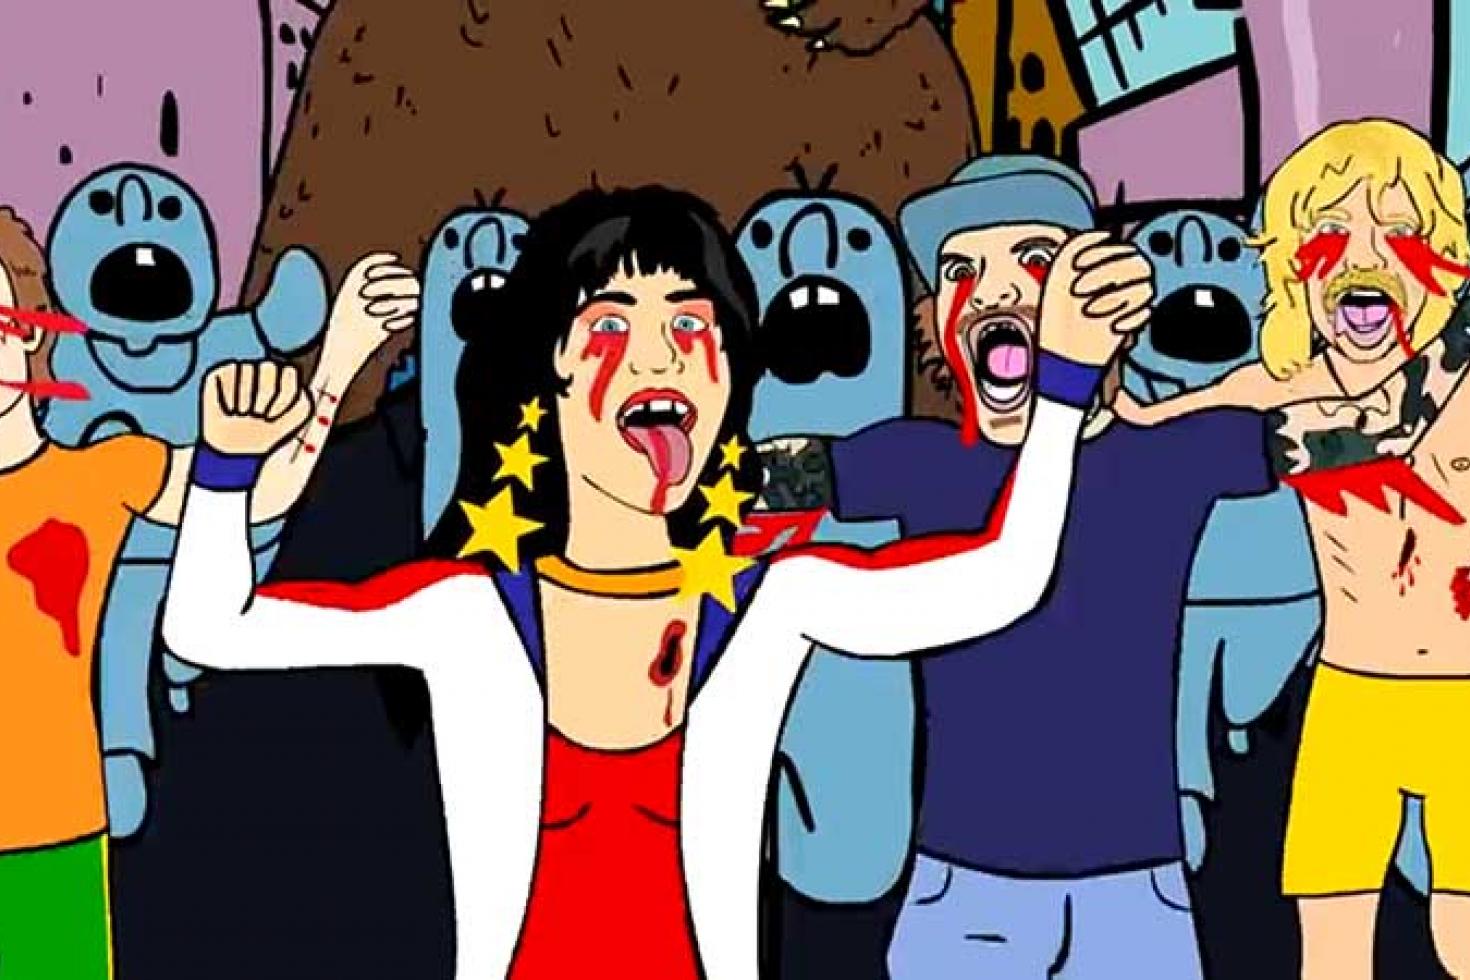 Surfbort & Butthole Surfers' Gibby Haynes get animated in new video